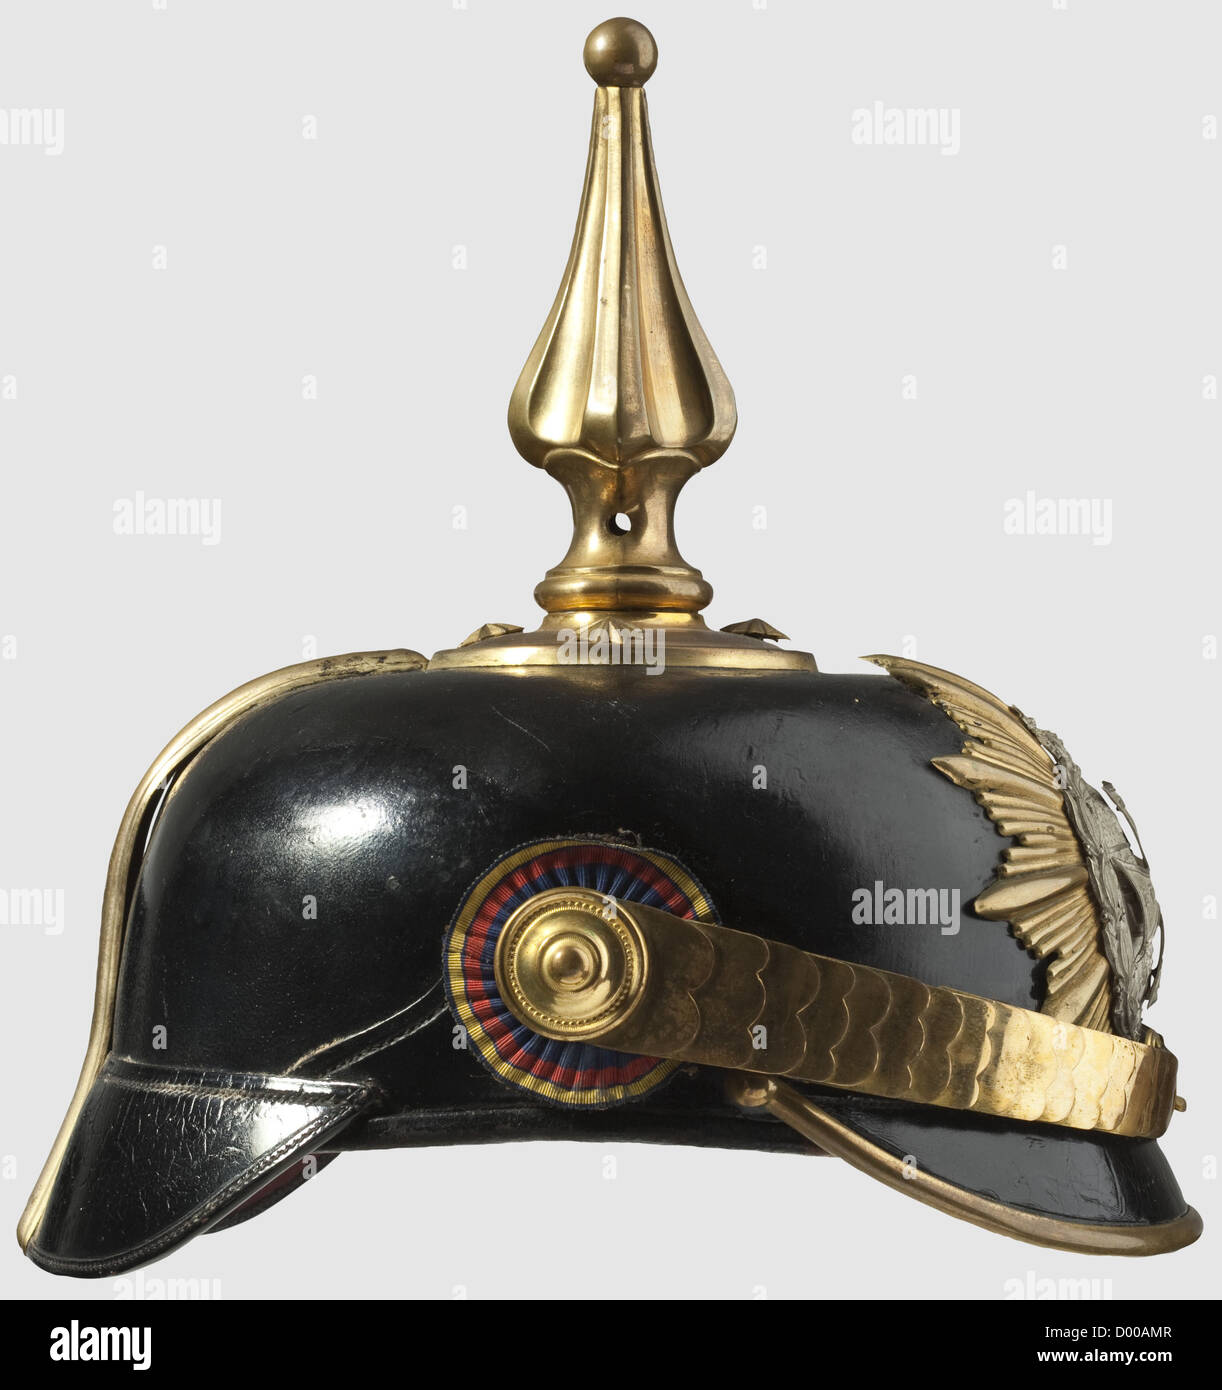 A helmet for officers of the Infantry Reserve or Medical Service,as worn until 1897.Leather skull with gilded mountings.The helmet spike is of the special Mecklenburg pattern with a turn-off ball finial.Silver-plated Mecklenburg arms displayed on the gilded star plate with a superimposed Landwehr cross,so mounted that it may be removed without a trace(no hole in the emblem).Flat metal chinscales.Silk national cockade on the right side.Ribbed silk lining with the owner's name 'Dr.Holm'.Beautifully preserved,rare helmet,historic,historical,19th cen,Additional-Rights-Clearences-Not Available Stock Photo